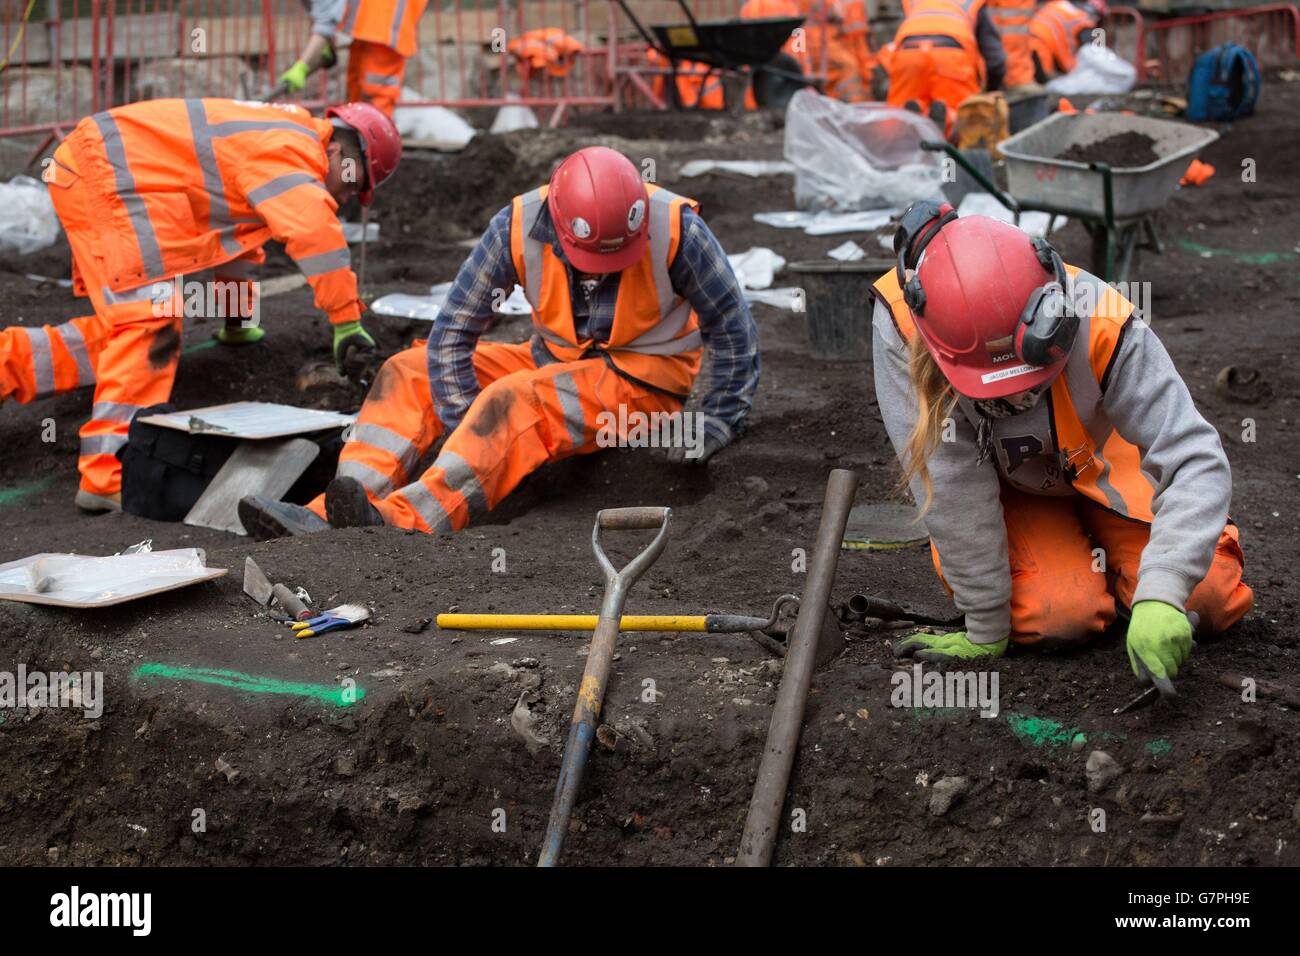 Archaeologists from MOLA (Museum of London Archaeology) at work on the Bedlam burial ground where over 20,000 Londoners are believed to have been buried between 1569 and 1738, the excavation will allow the construction of East entrance of the New Liverpool St. Crossrail Ticket station, Liverpool Street, London. Stock Photo